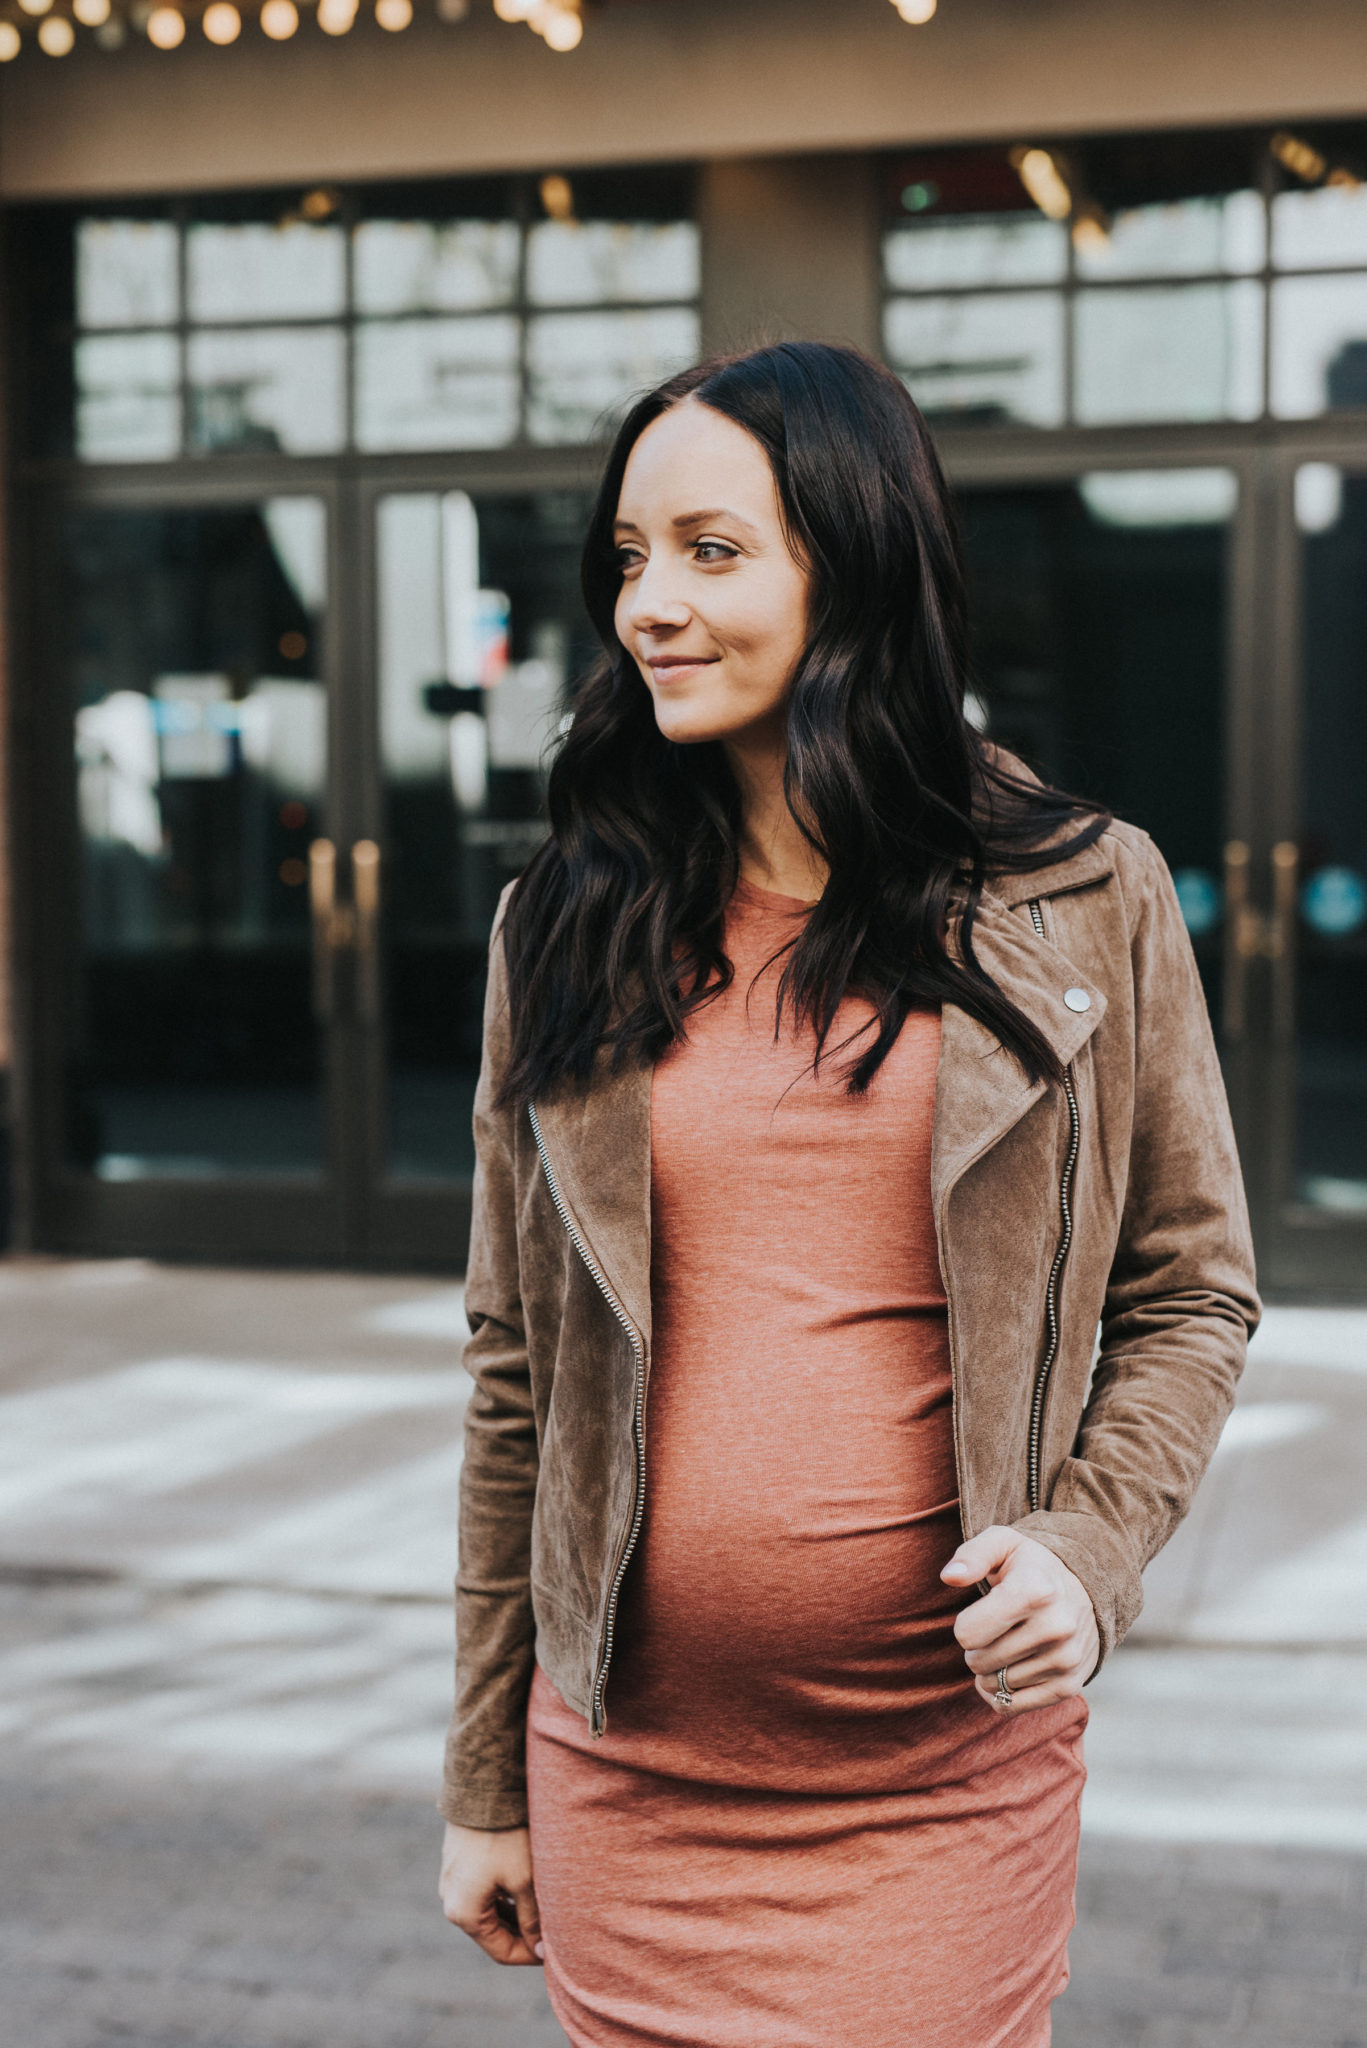 Cute Maternity Outfits by popular Las Vegas fashion blogger Outfits & Outings